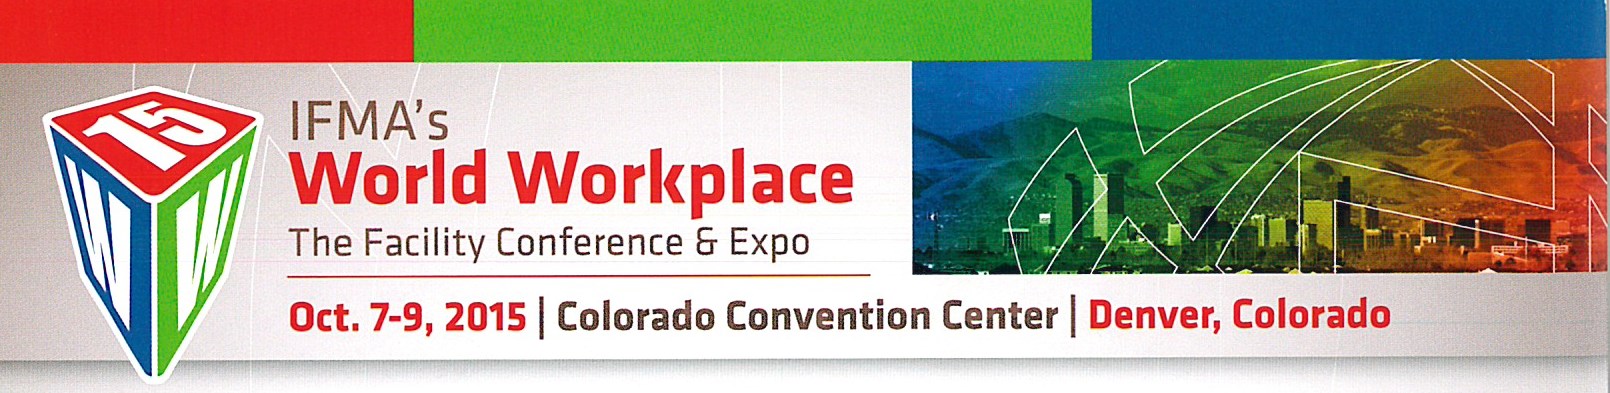 IFMA's World Workplace conference in Denver 2015